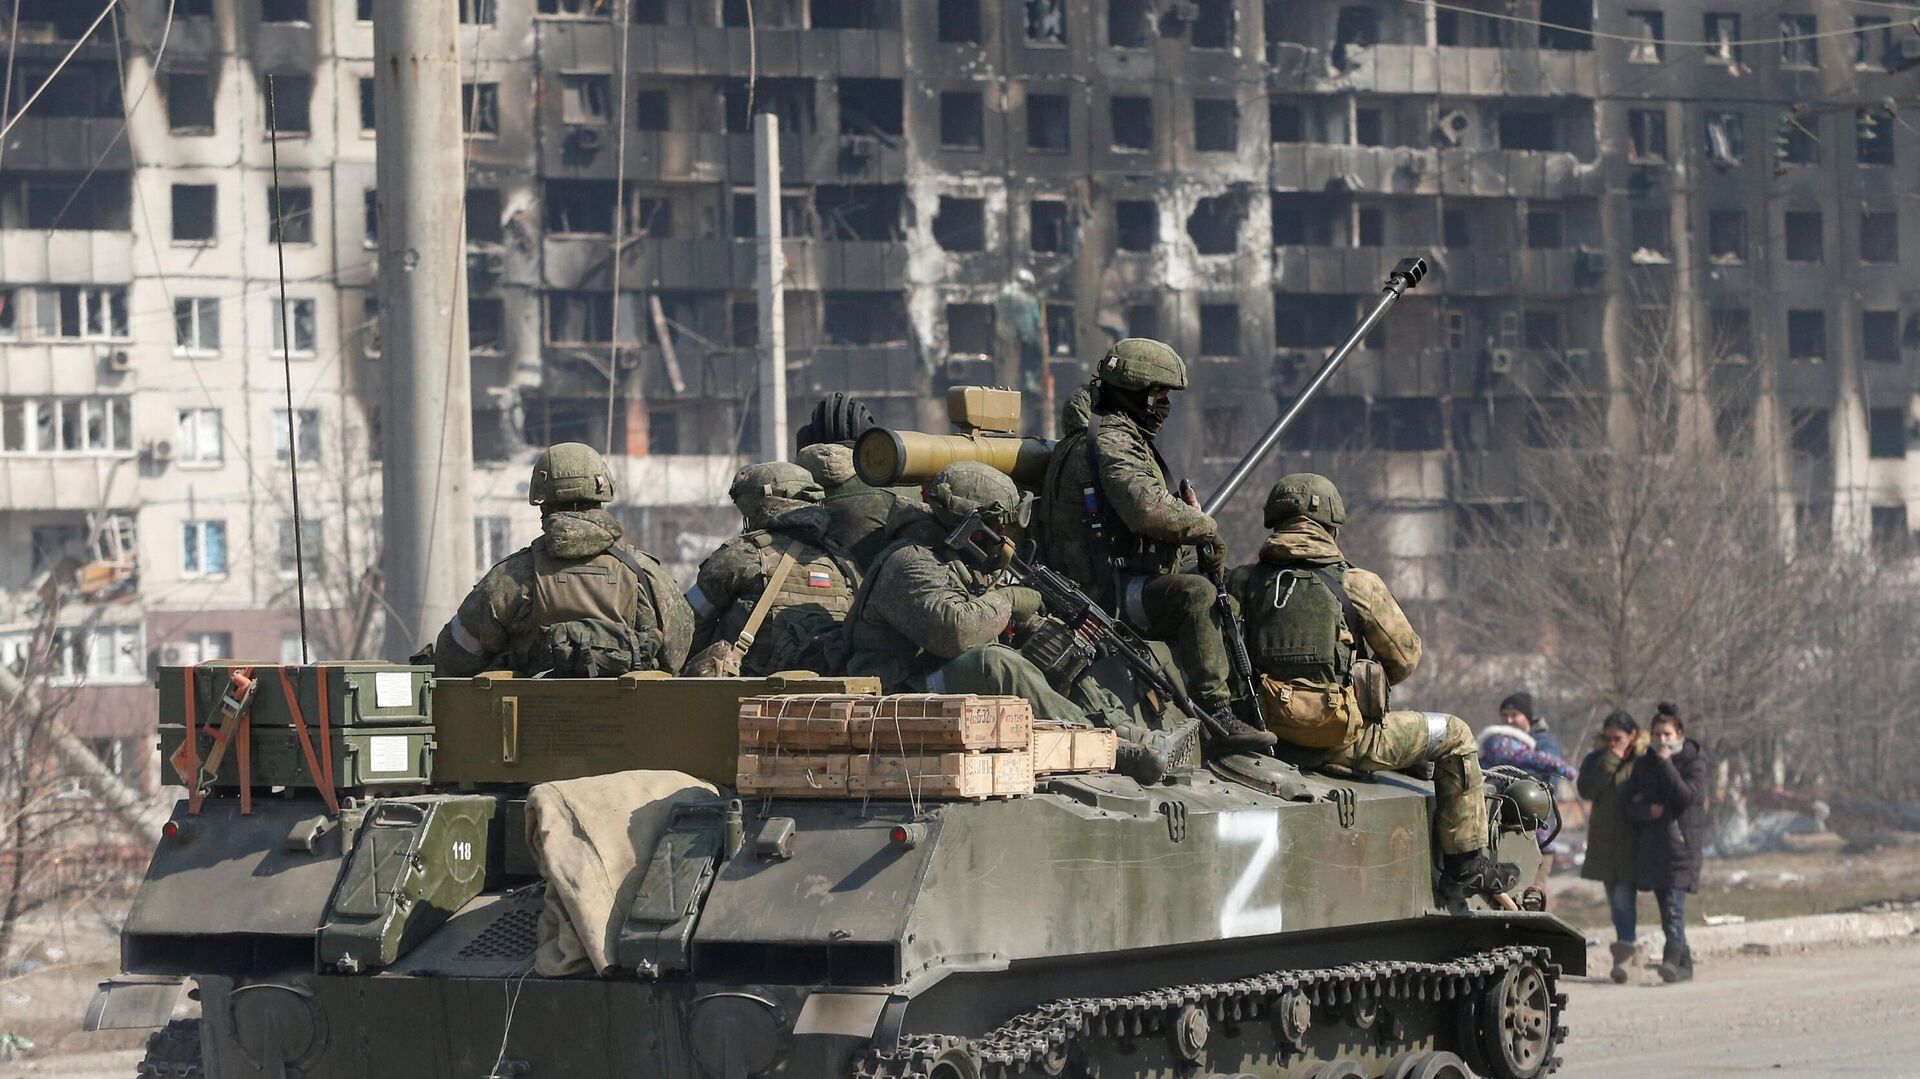 Service members of pro-Russian troops are seen atop of an armoured vehicle with the symbol Z painted on its side in the course of Ukraine-Russia conflict in the besieged southern port city of Mariupol, Ukraine March 24, 2022. - Sputnik International, 1920, 29.03.2022